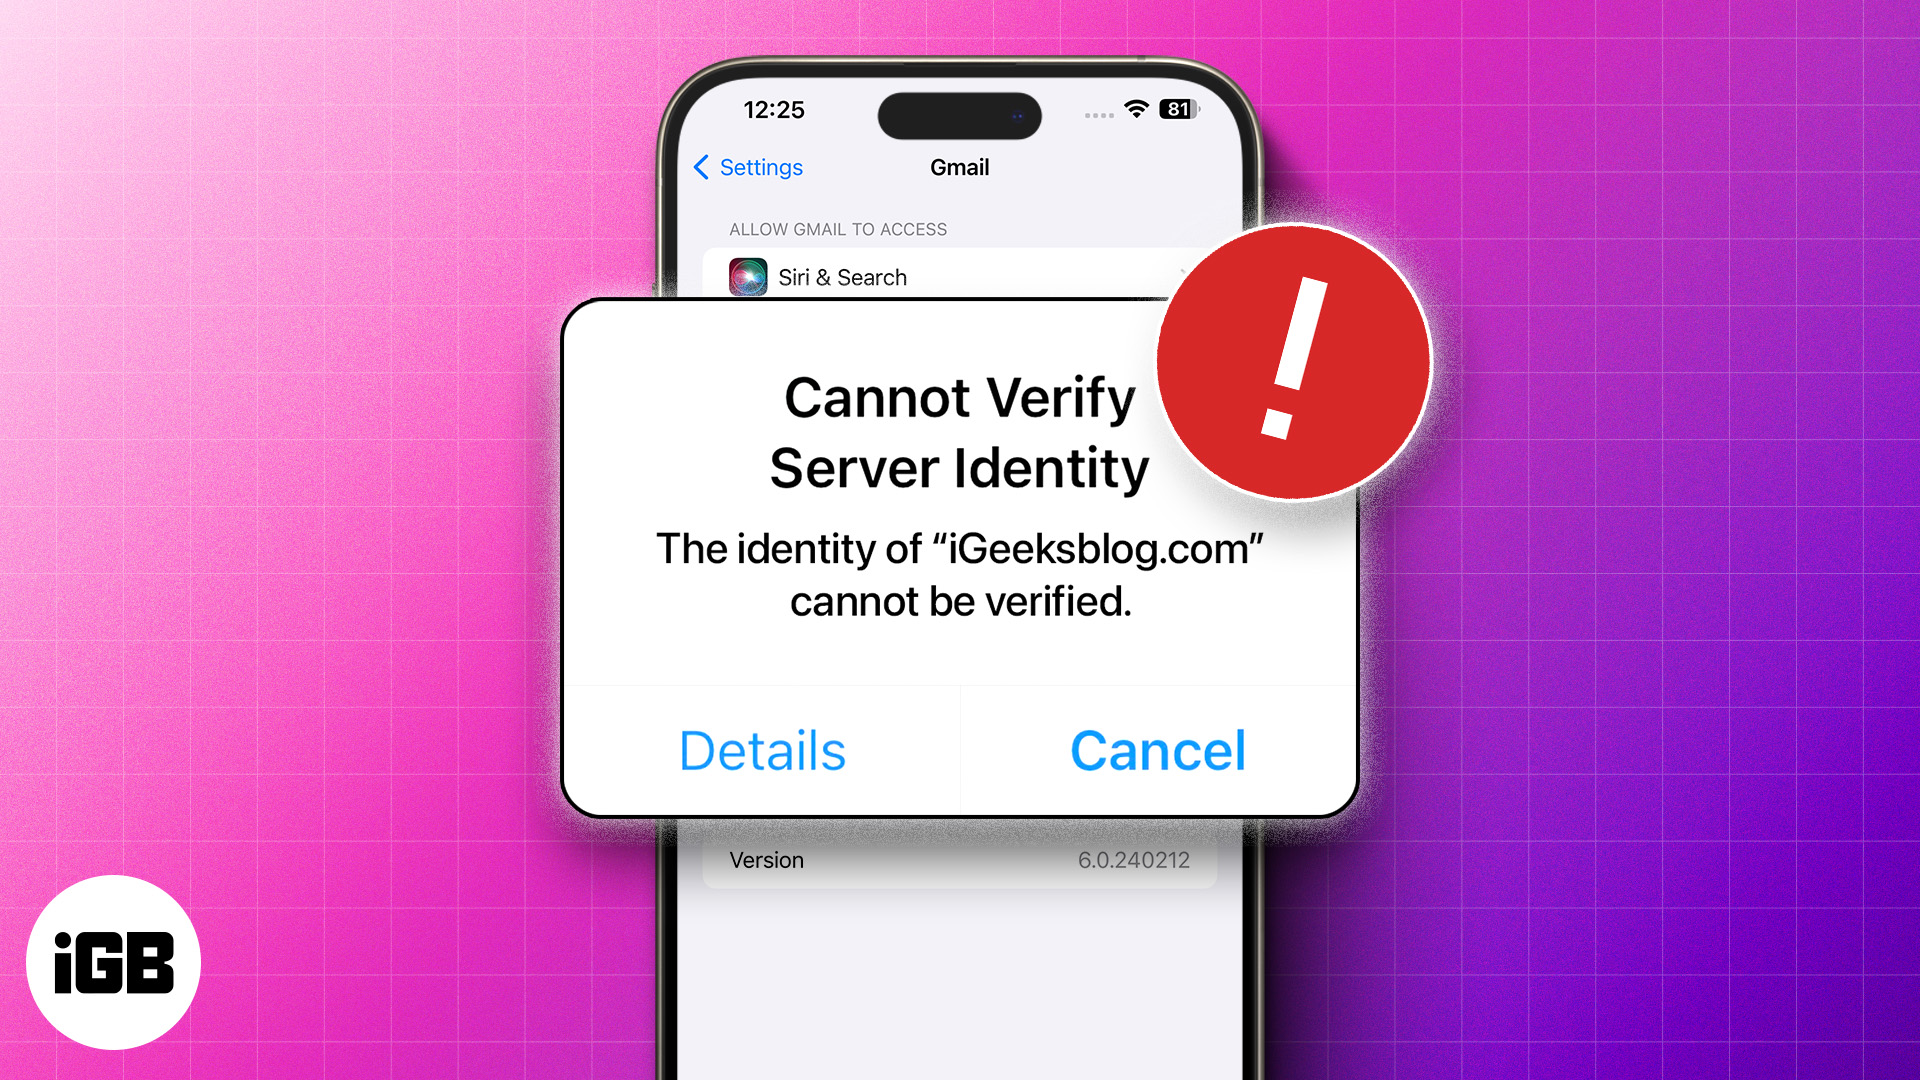 How to fix “Cannot Verify Server Identity” error on iPhone